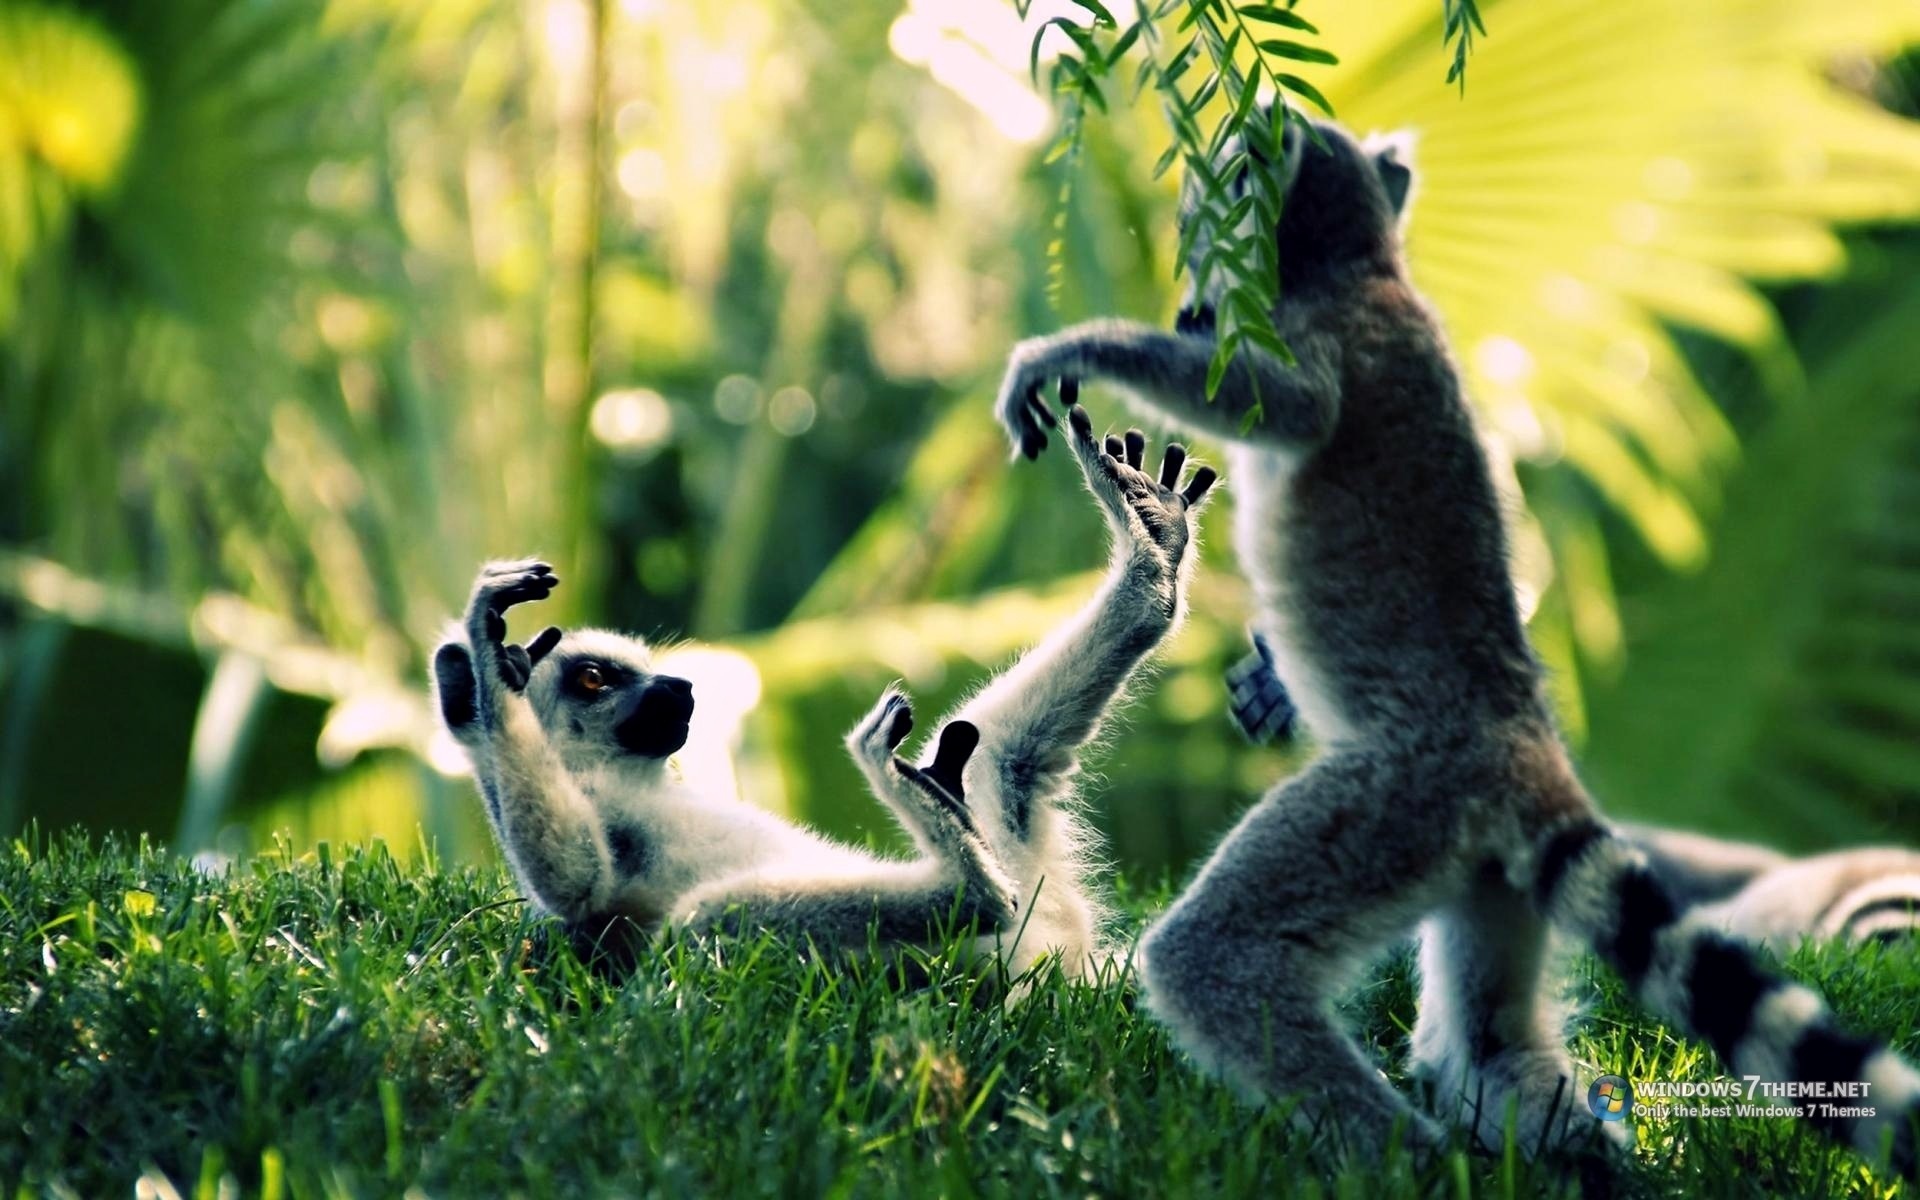 ring, Tailed, Lemur, Primate, Madagascar, Tails, Rings, Stripes, Play, Cute, Wildlife, Grass, Trees, Forest, Jungle, Plants, Fur Wallpaper